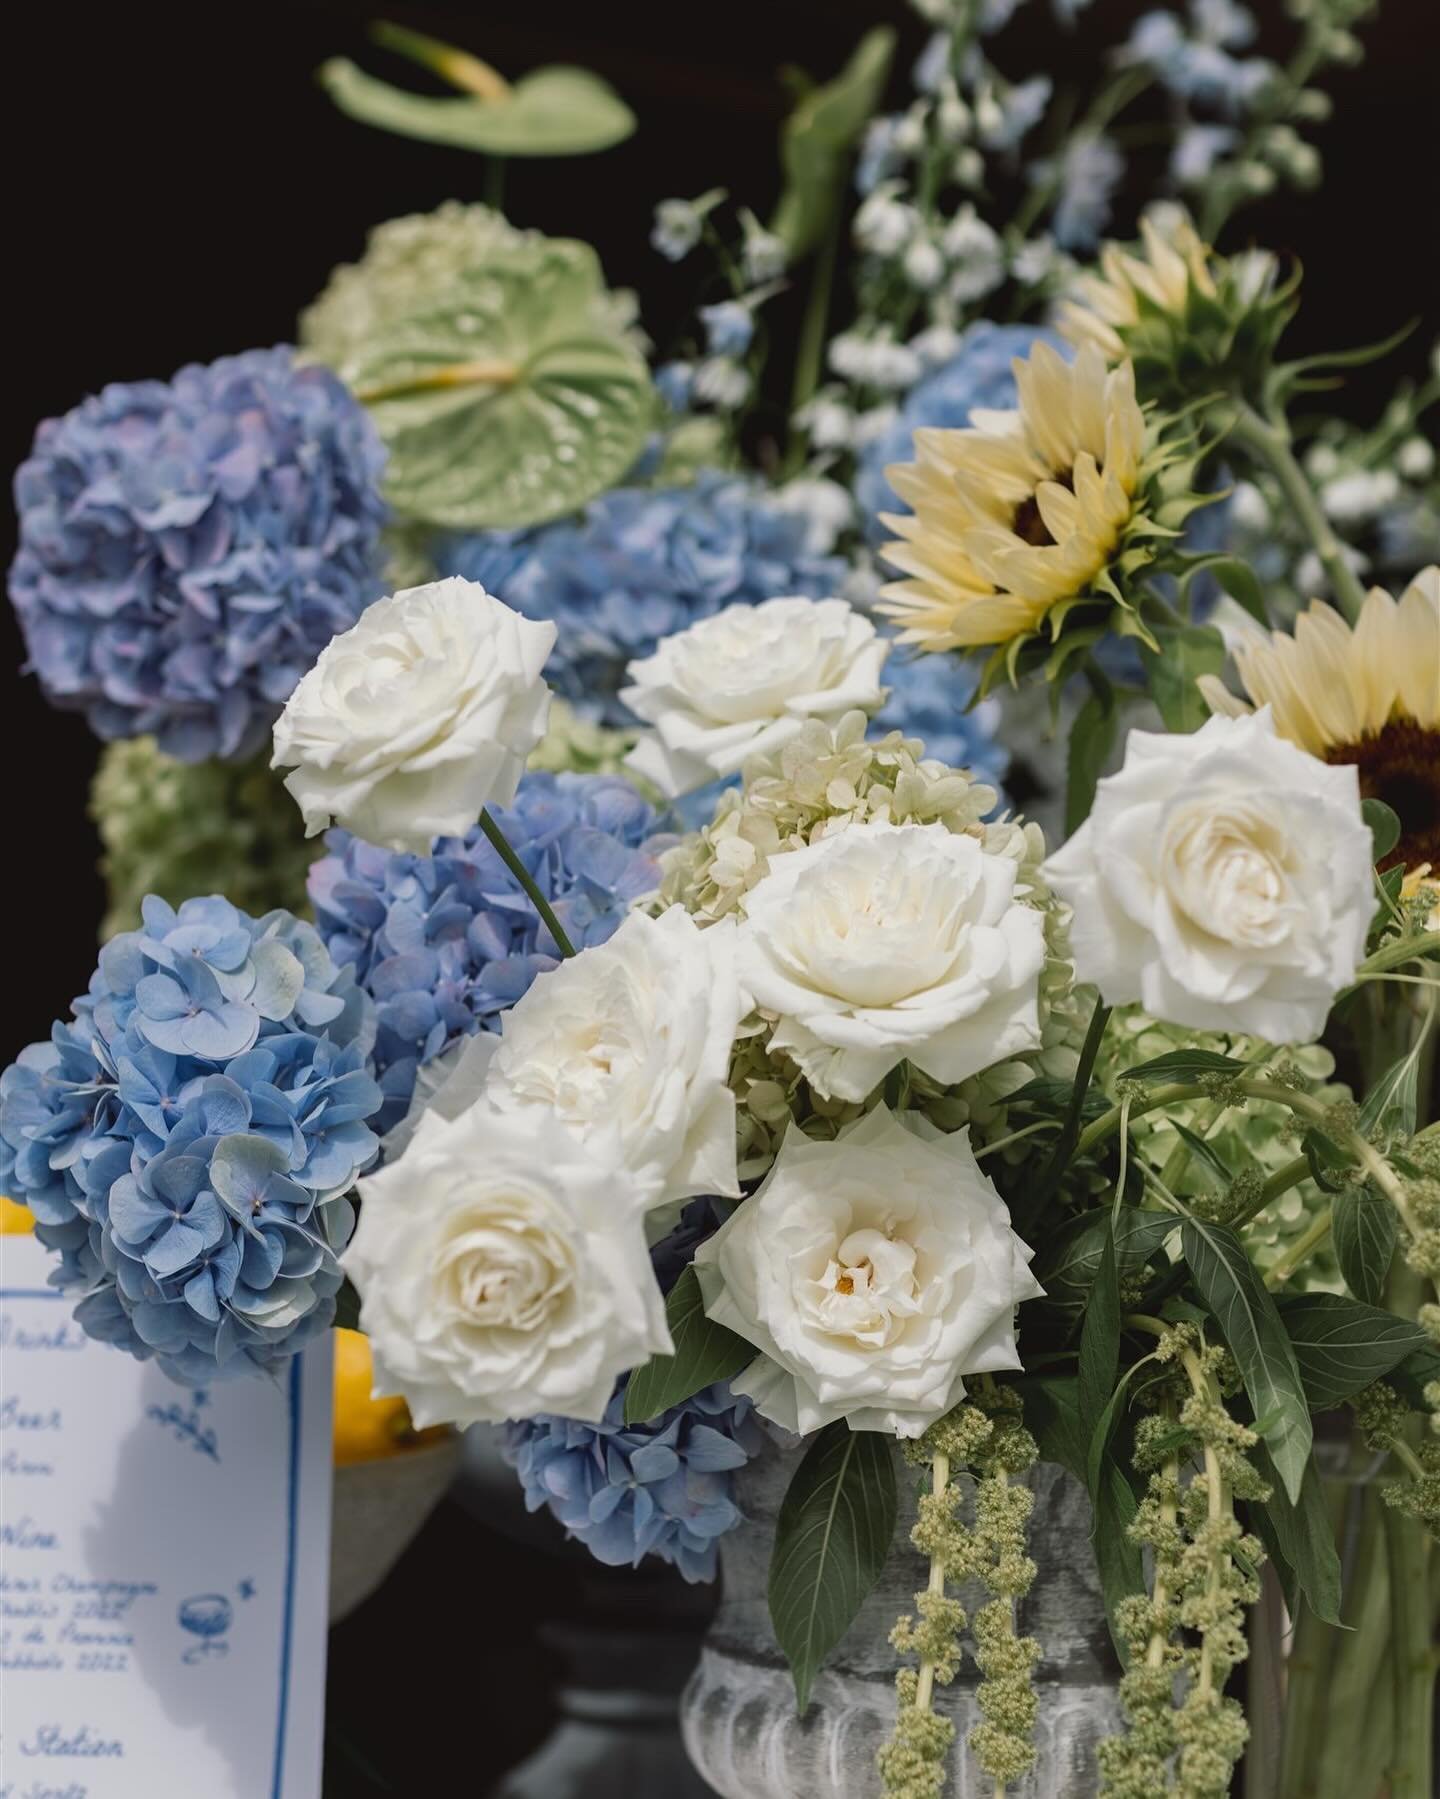 A wonderful way to make a beautiful floral statement is with a feature bar arrangement 🌻💙

&bull;
&bull;
&bull;

#wildflower #bar #bararrangement #flowers #flower #flowerarrangement #florals #flowerstagram #flowerphotography #weddingphotography #we